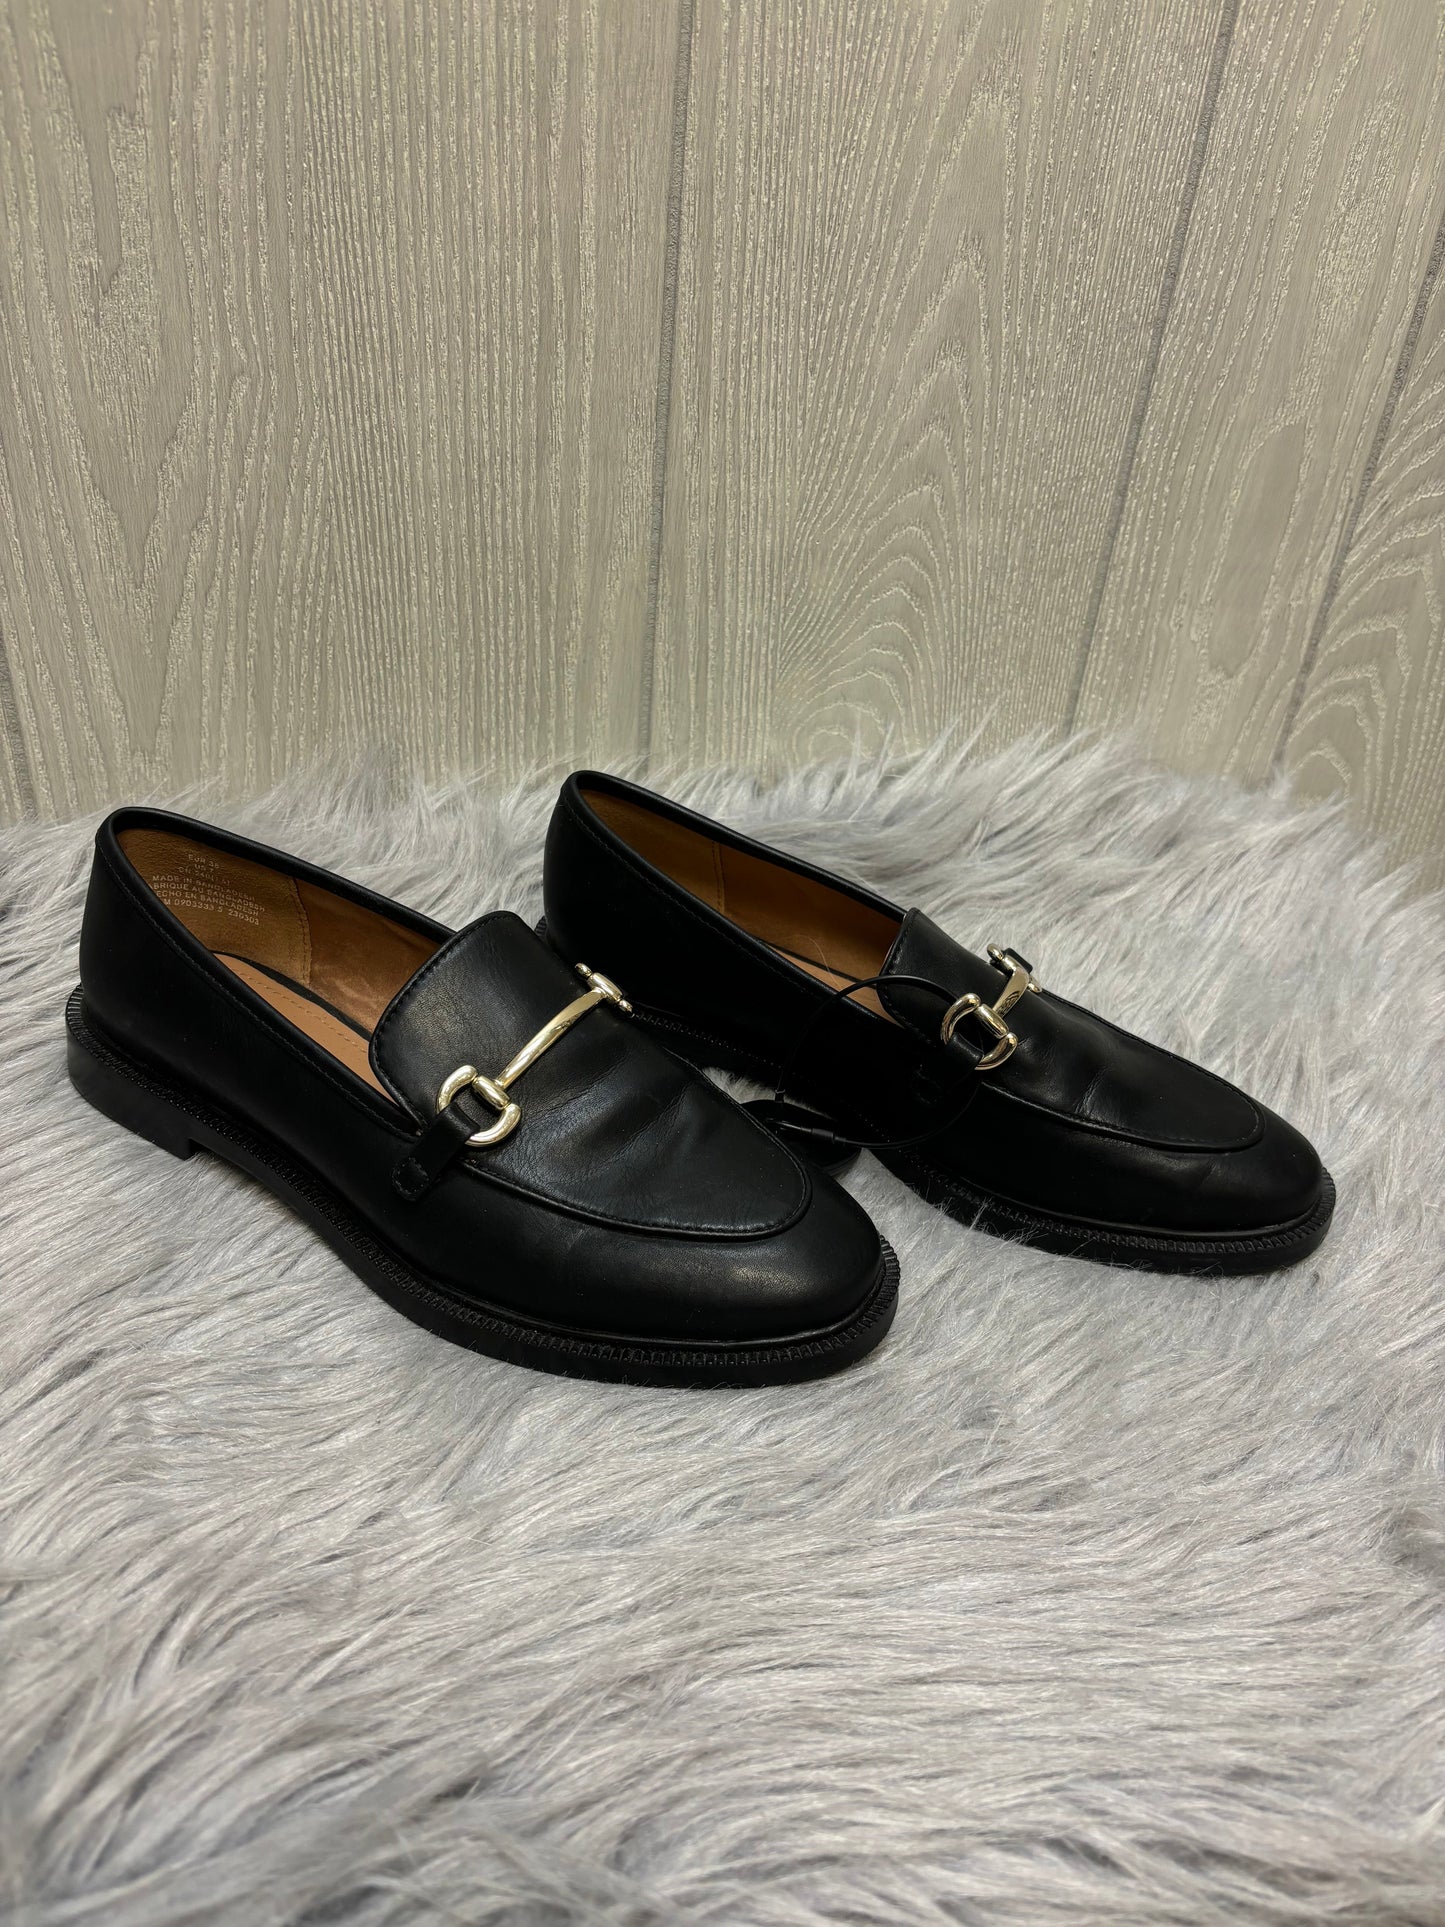 Black & Gold Shoes Flats Universal Thread, Size 7